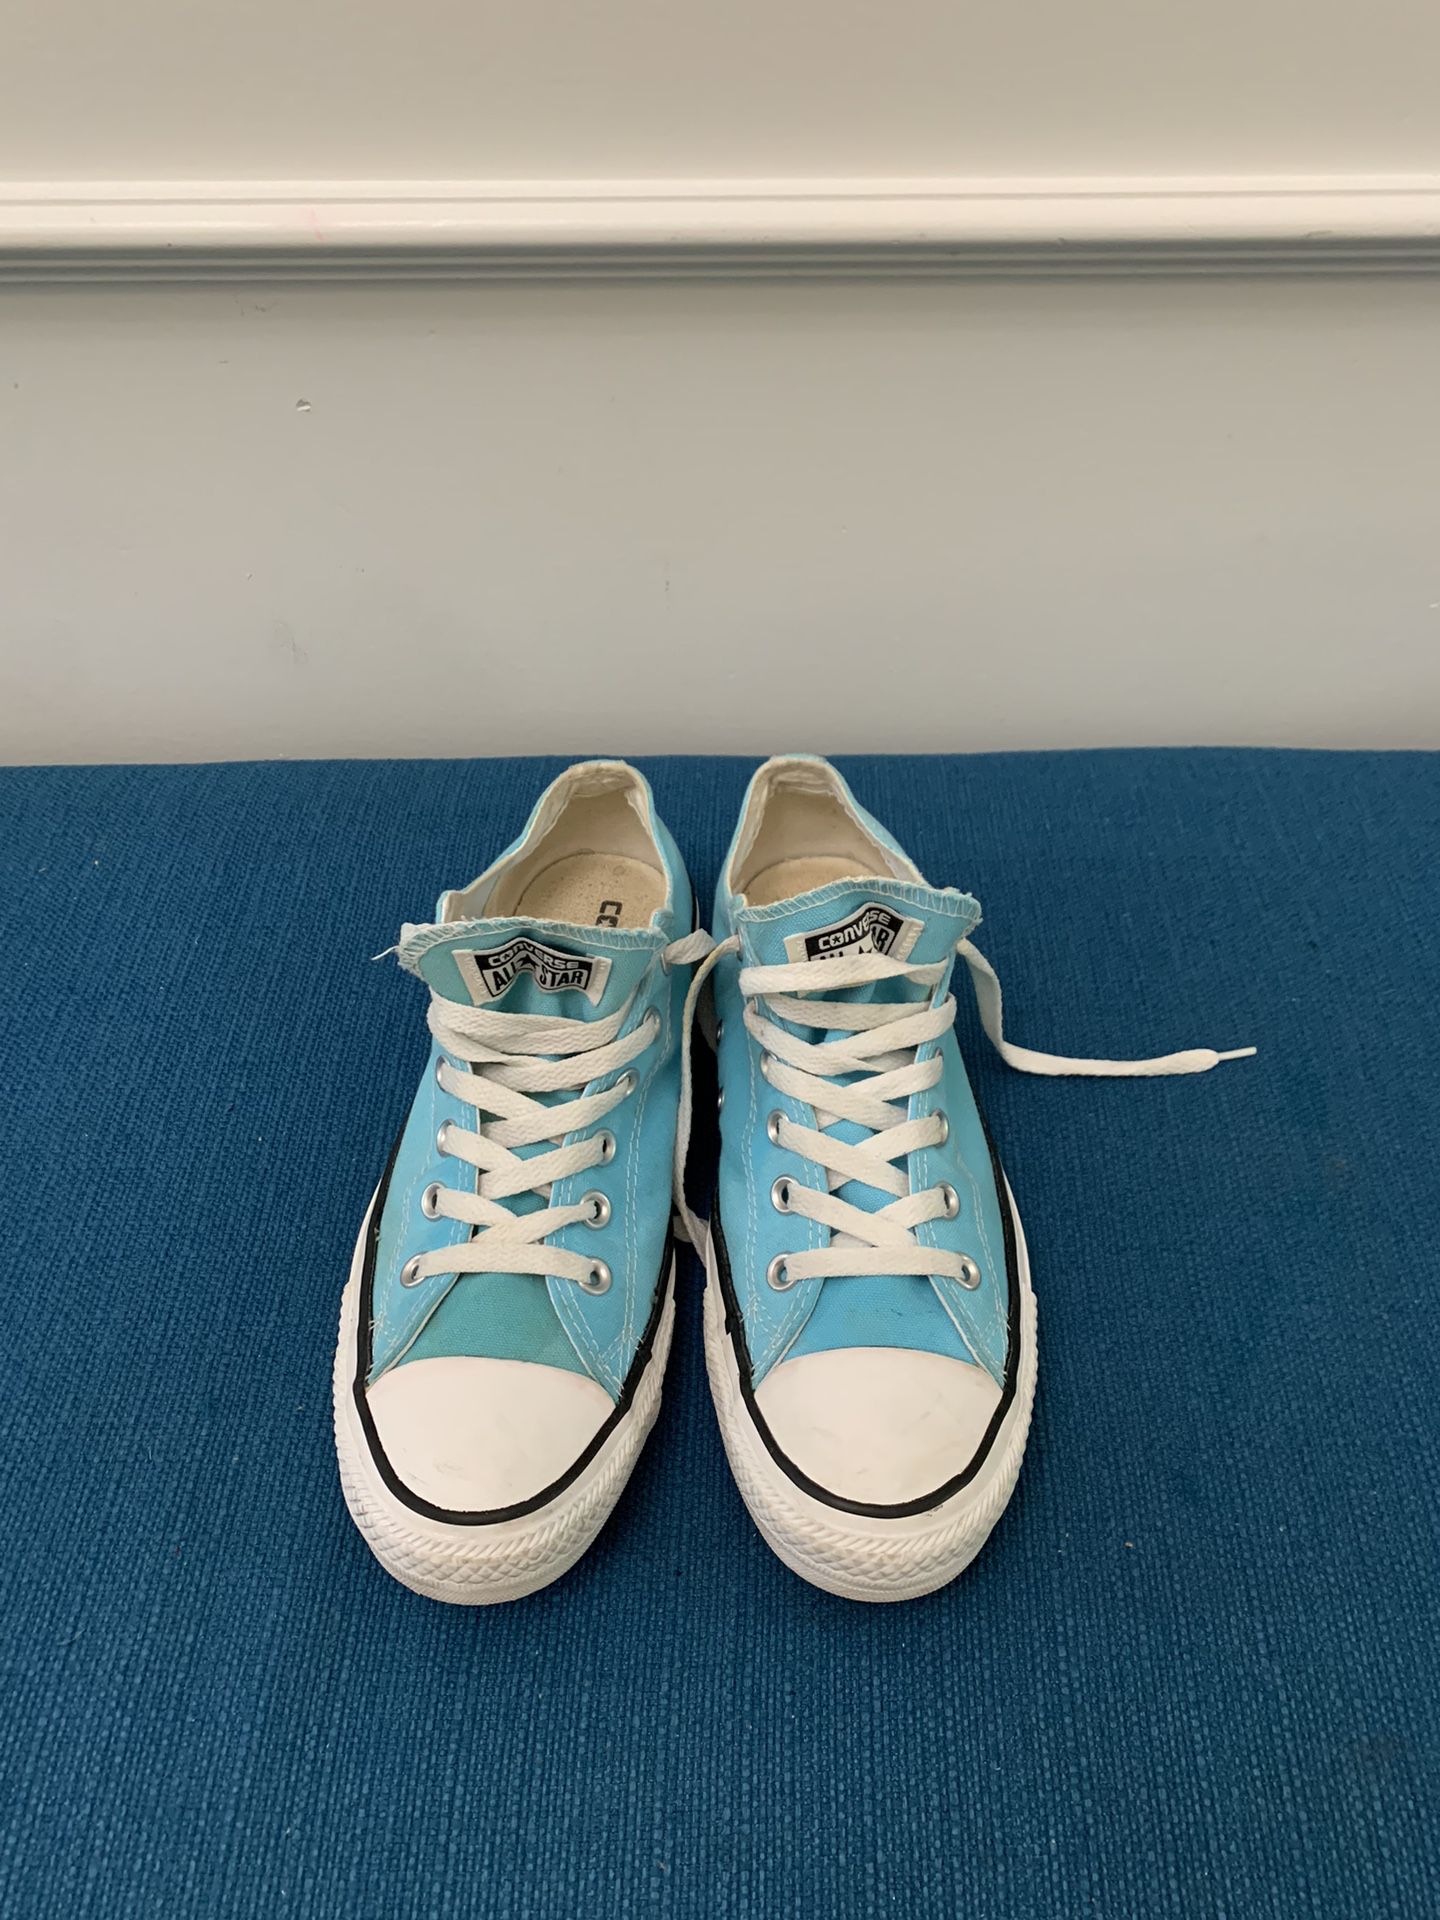 +All Stars Sale in Sterling Heights, - OfferUp